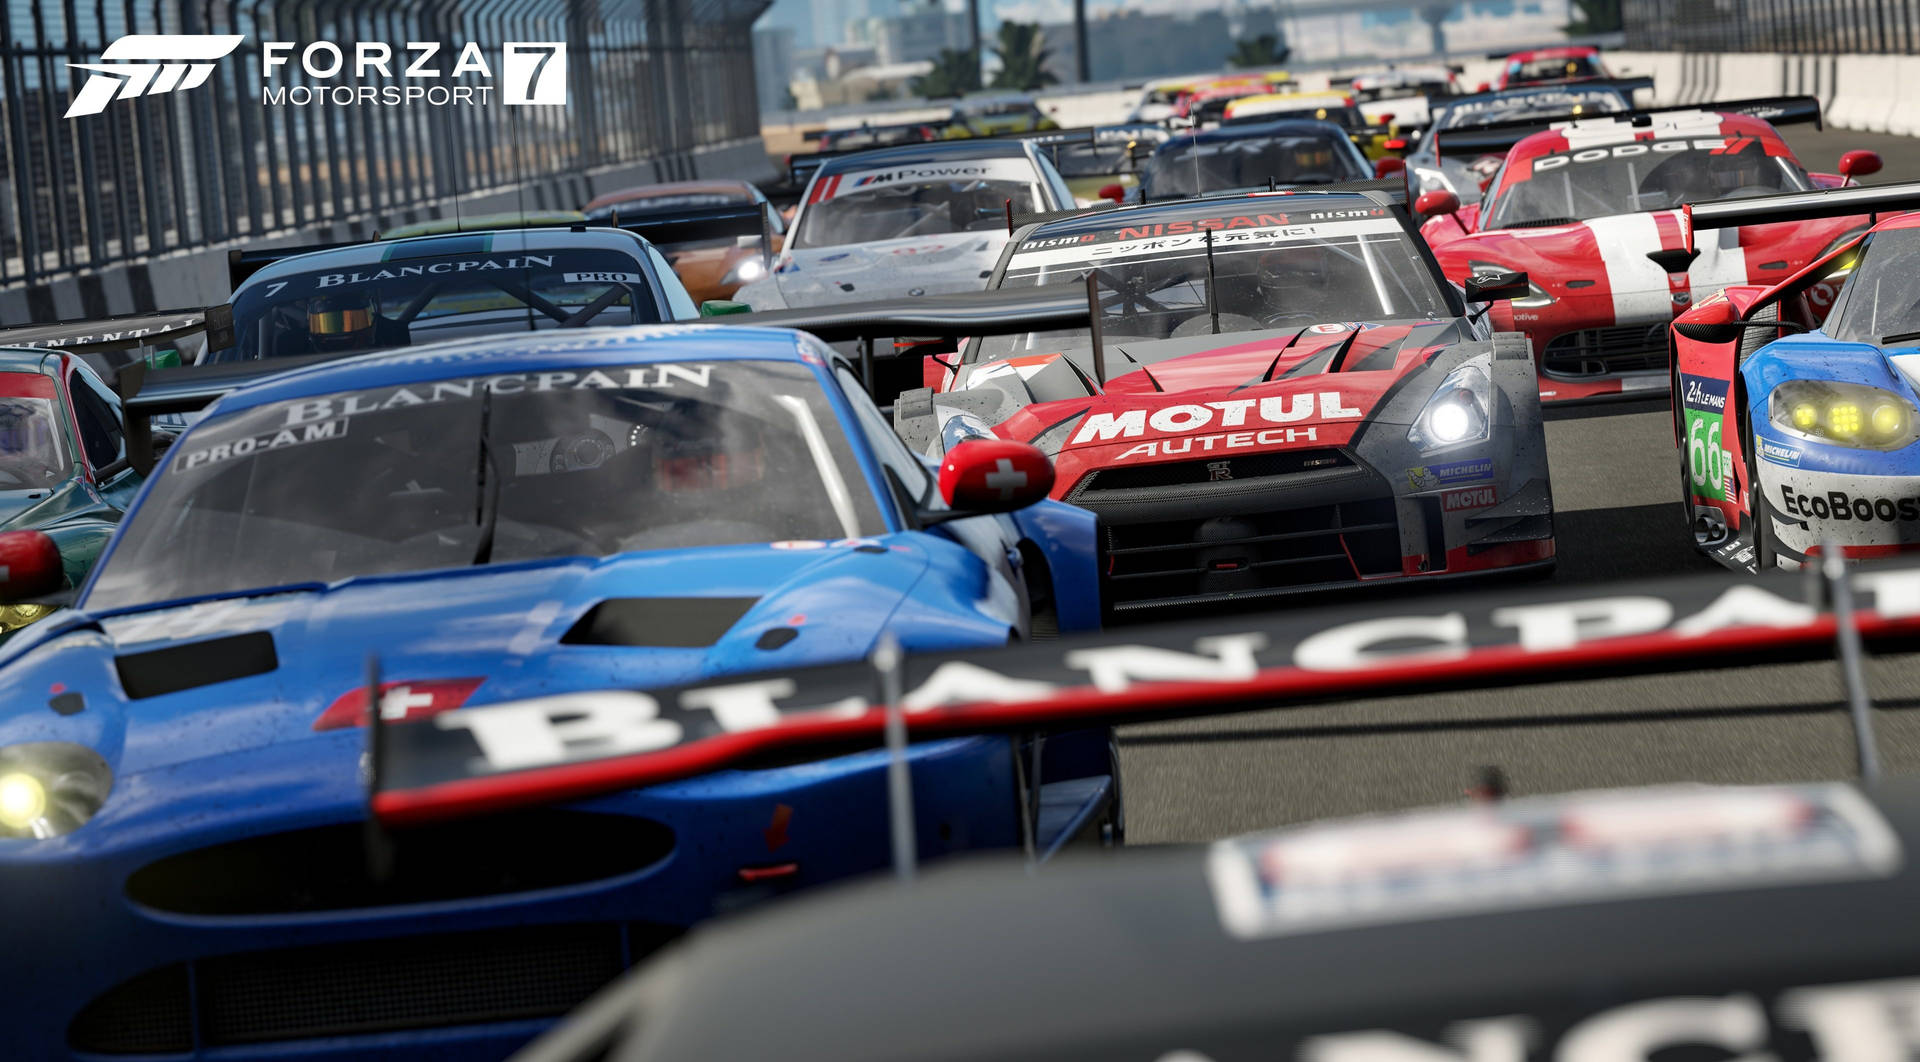 Forza Motorsport 7 Racing Cars Background